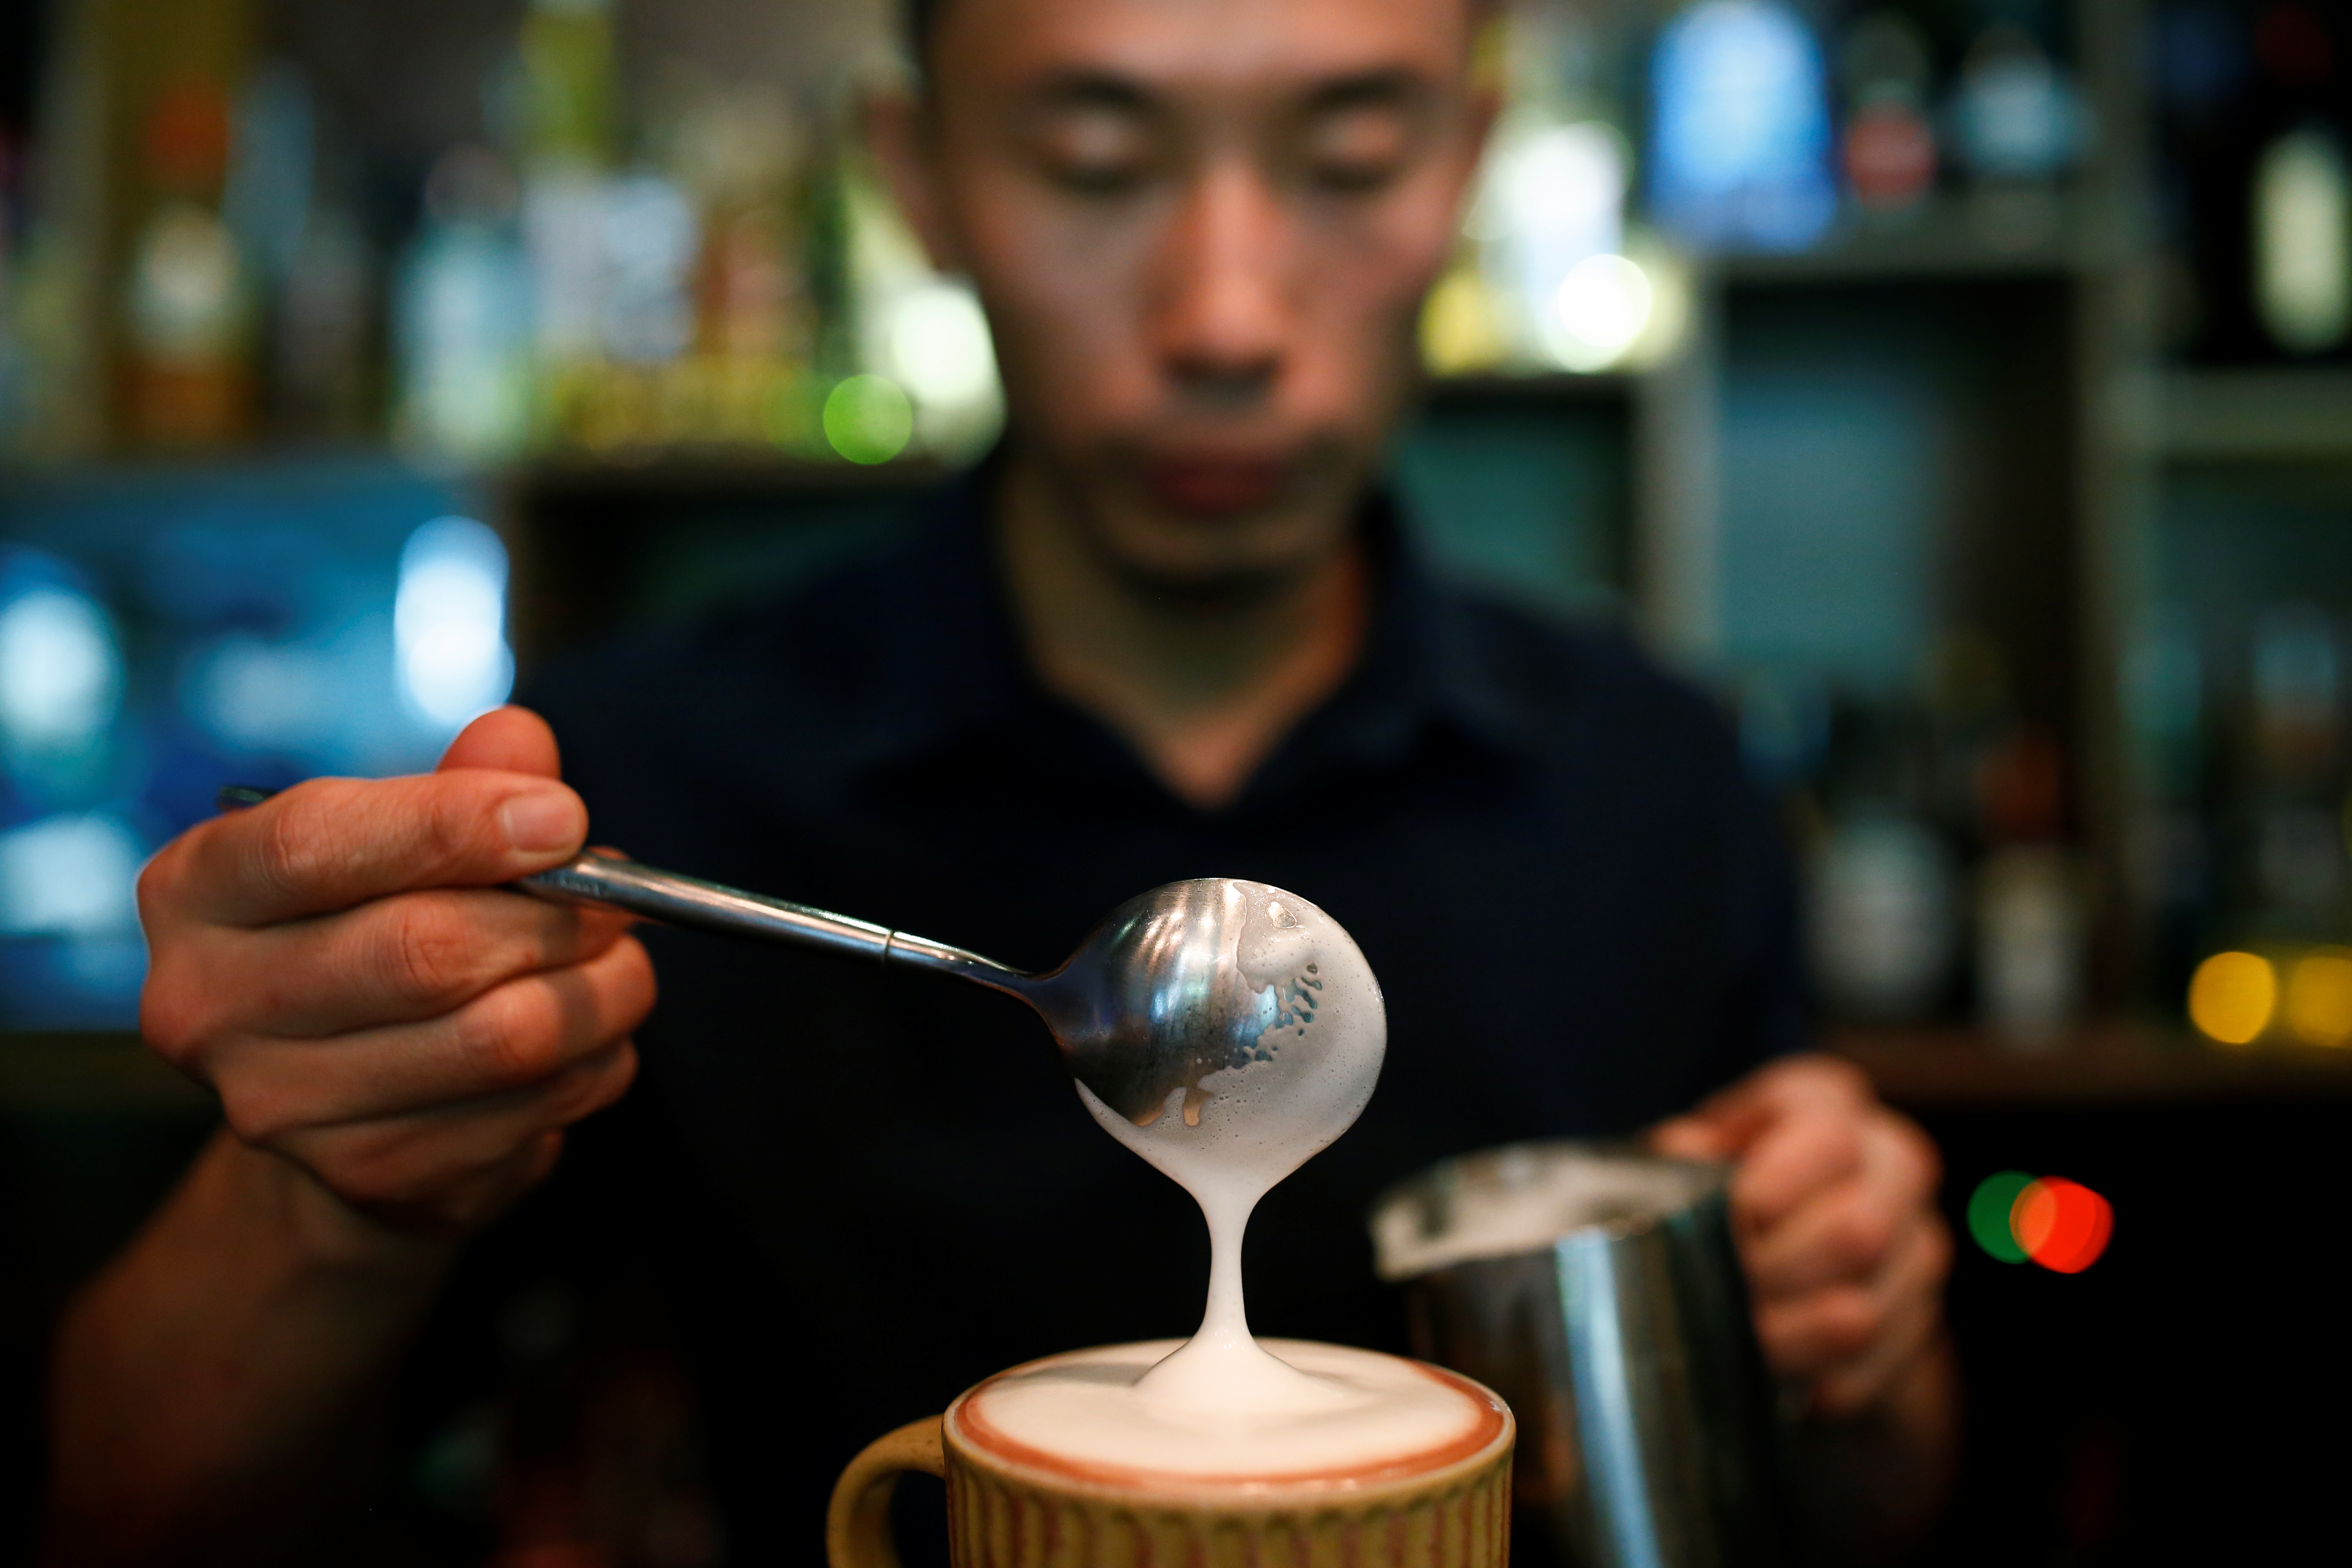 A barista pours milk into a coffee at the La Tercera cafe in Beijing